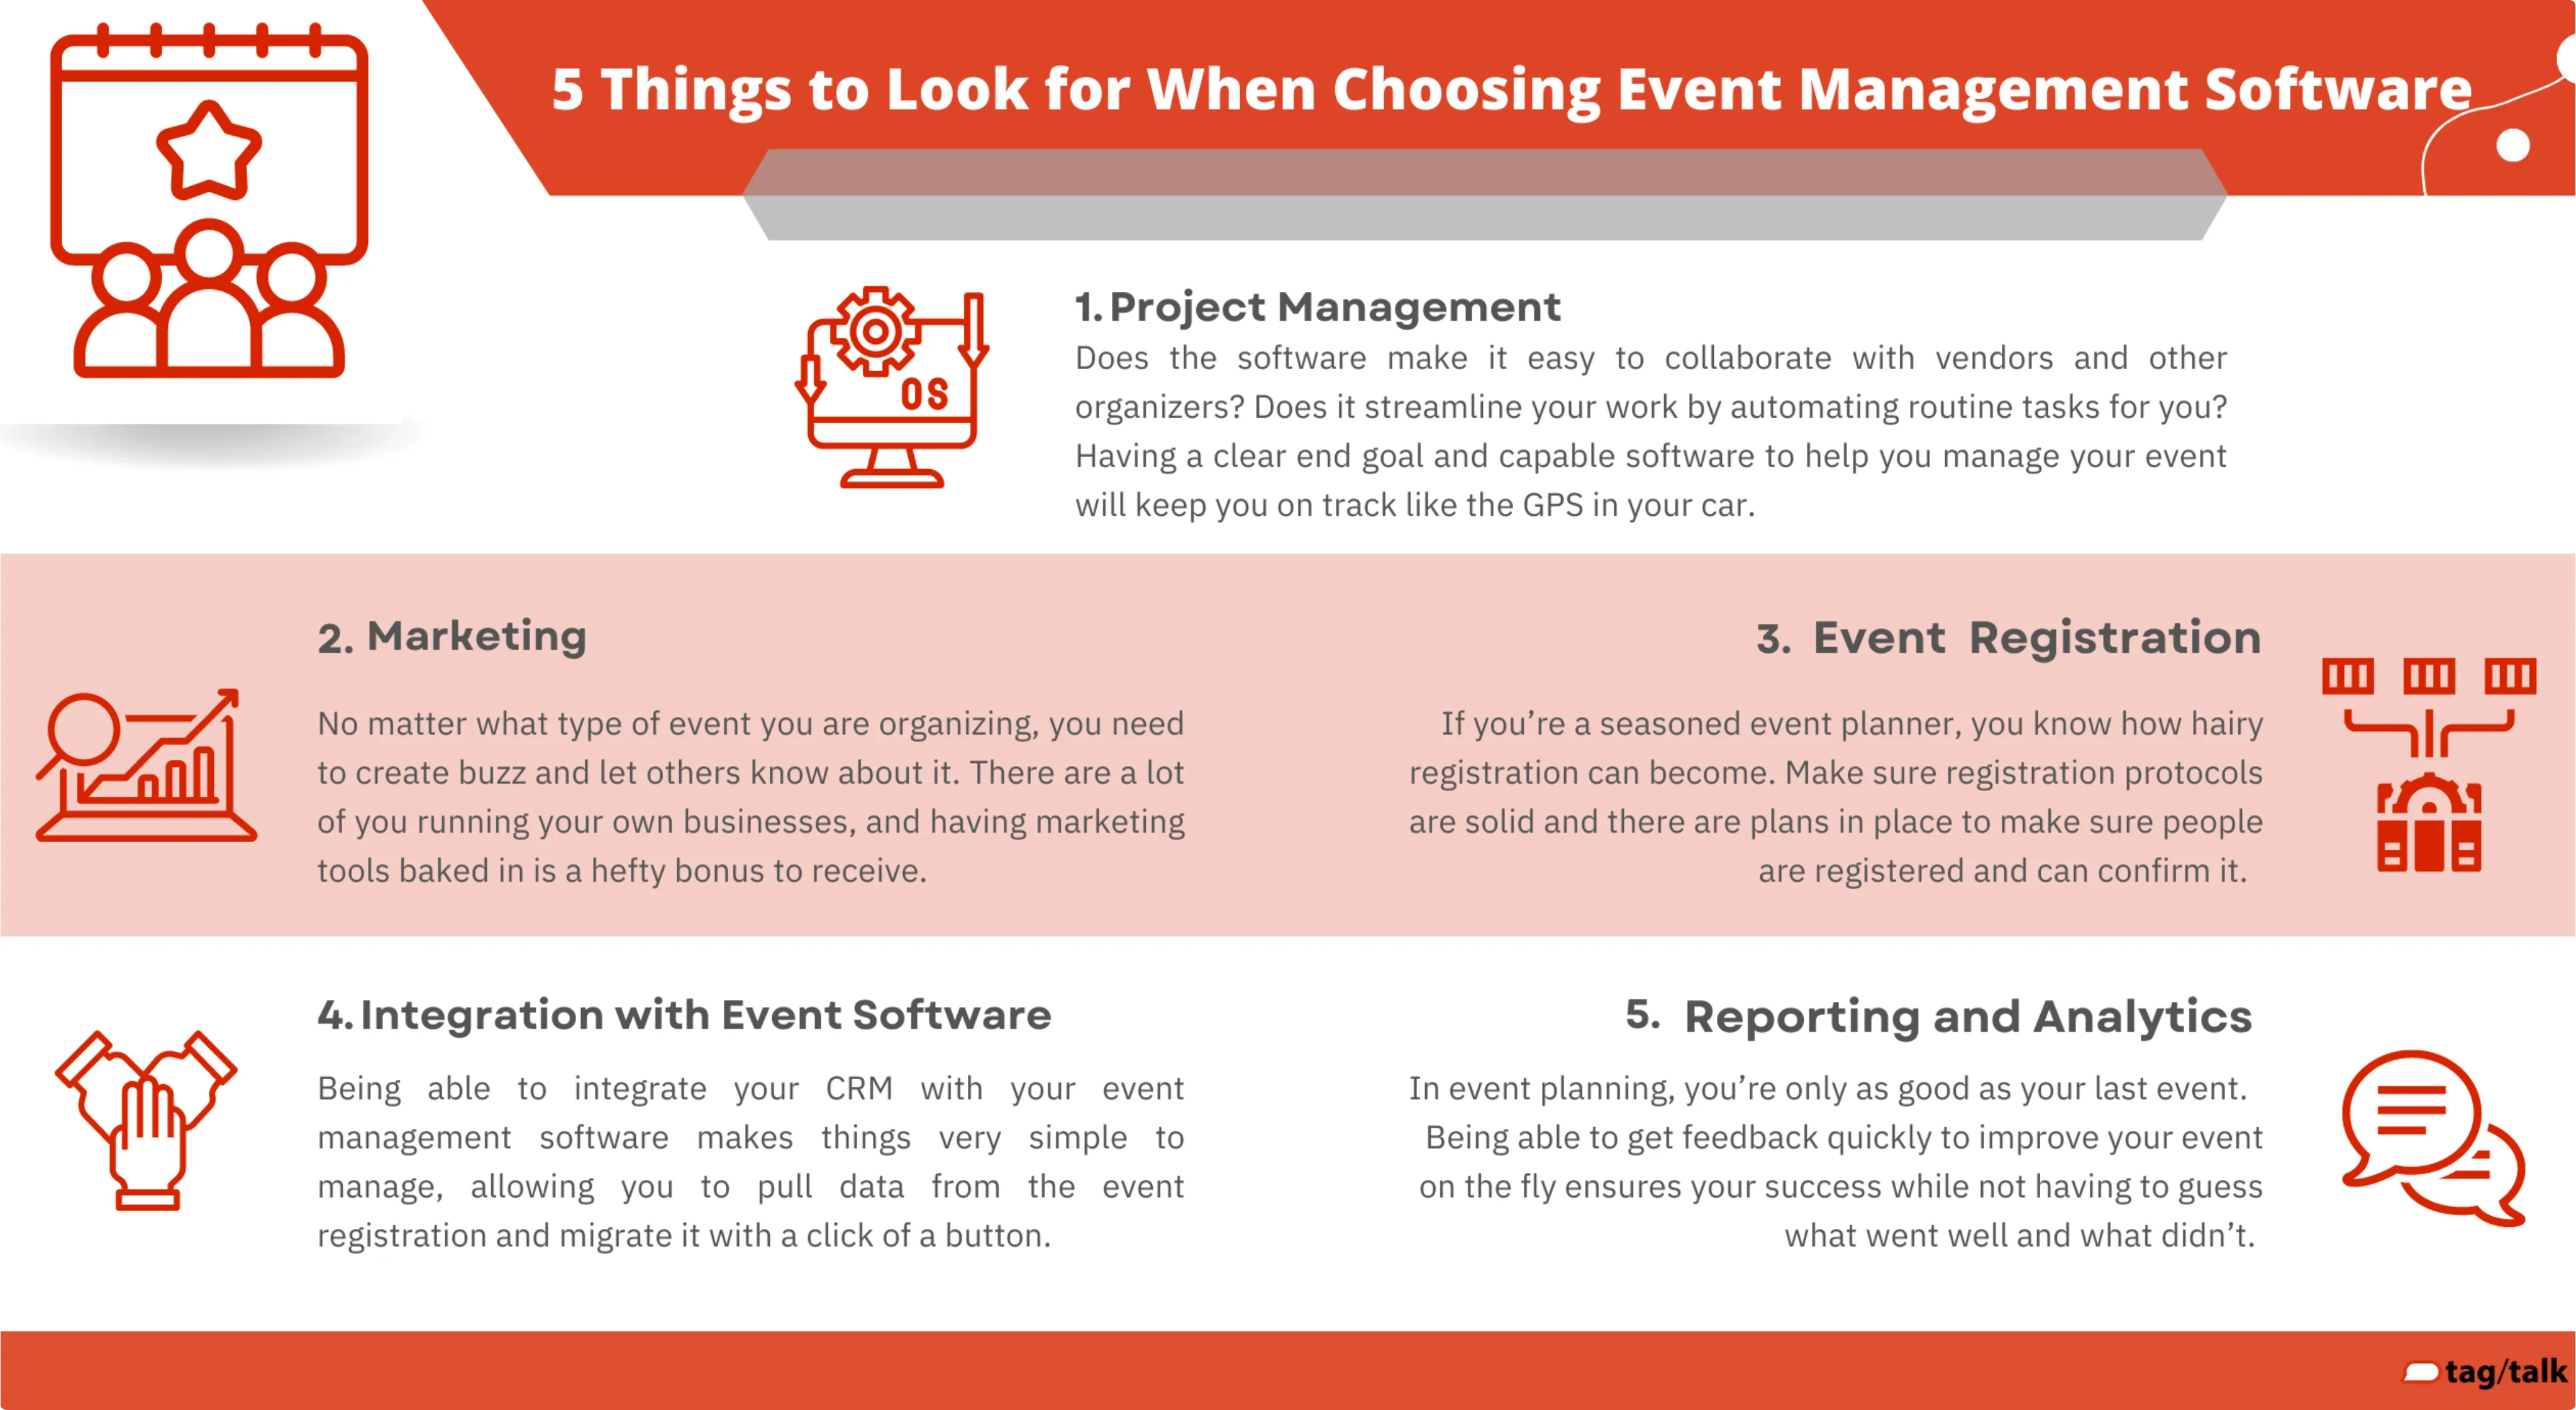 5 things to look for when choosing event management software - graphic by Crazy Egg